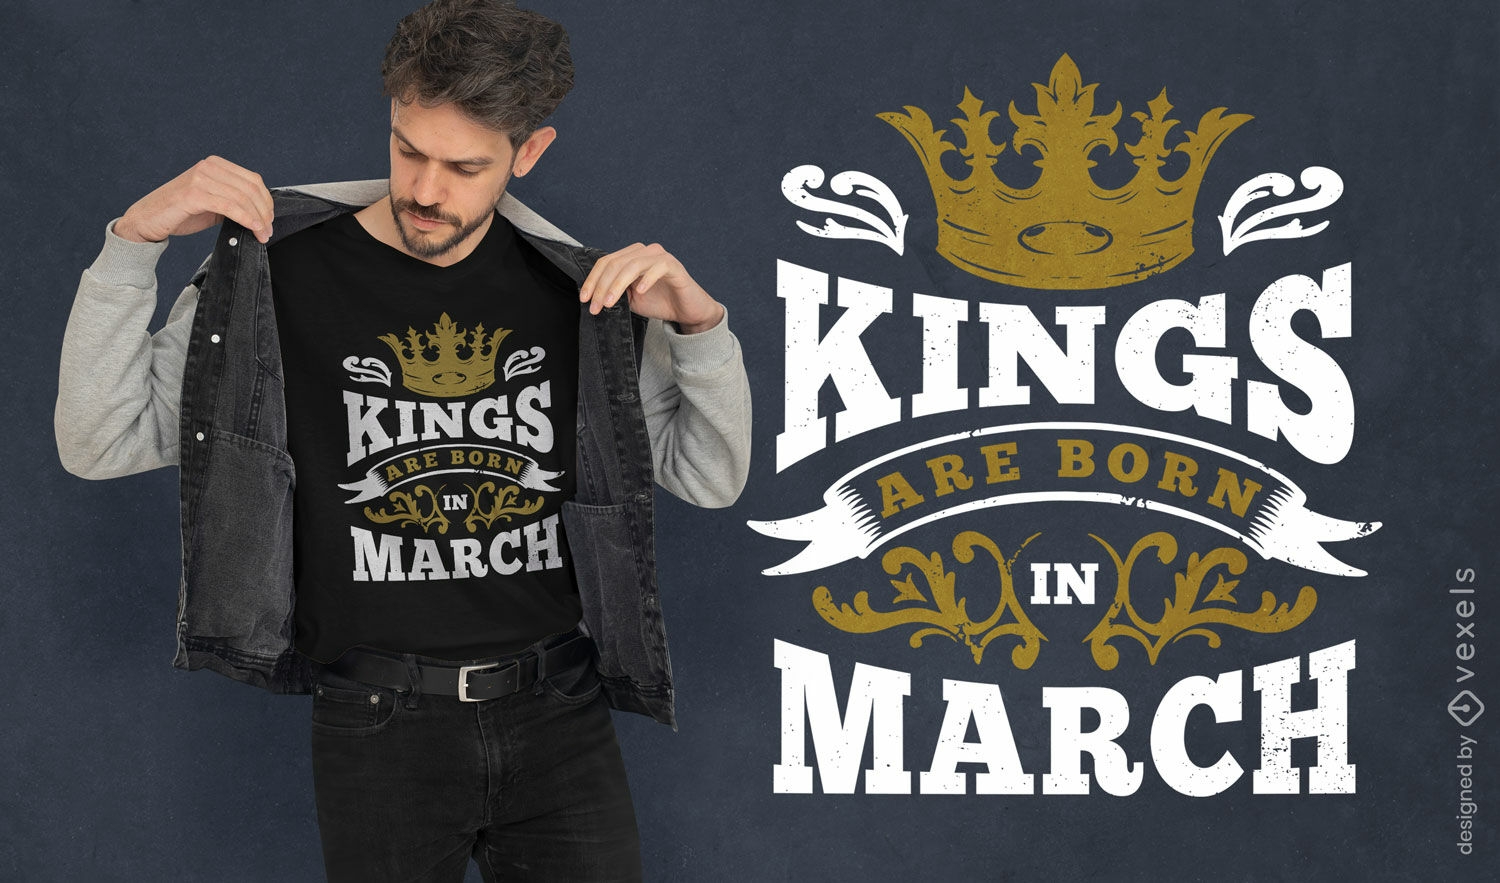 Kings born in march t-shirt design